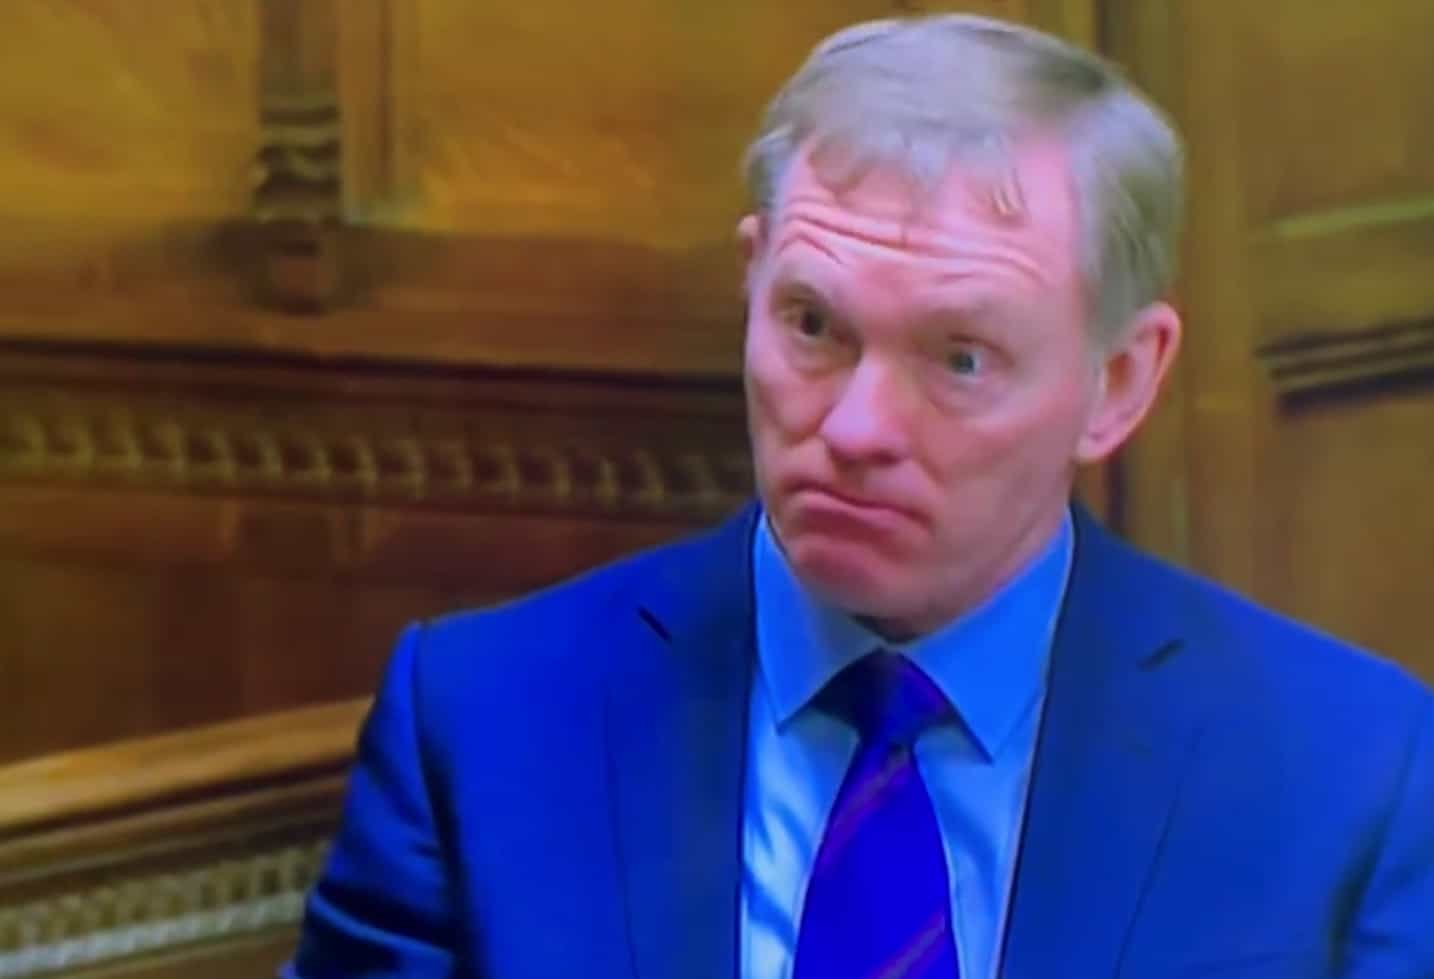 Chris Bryant says he has been sexually assaulted by five MPs